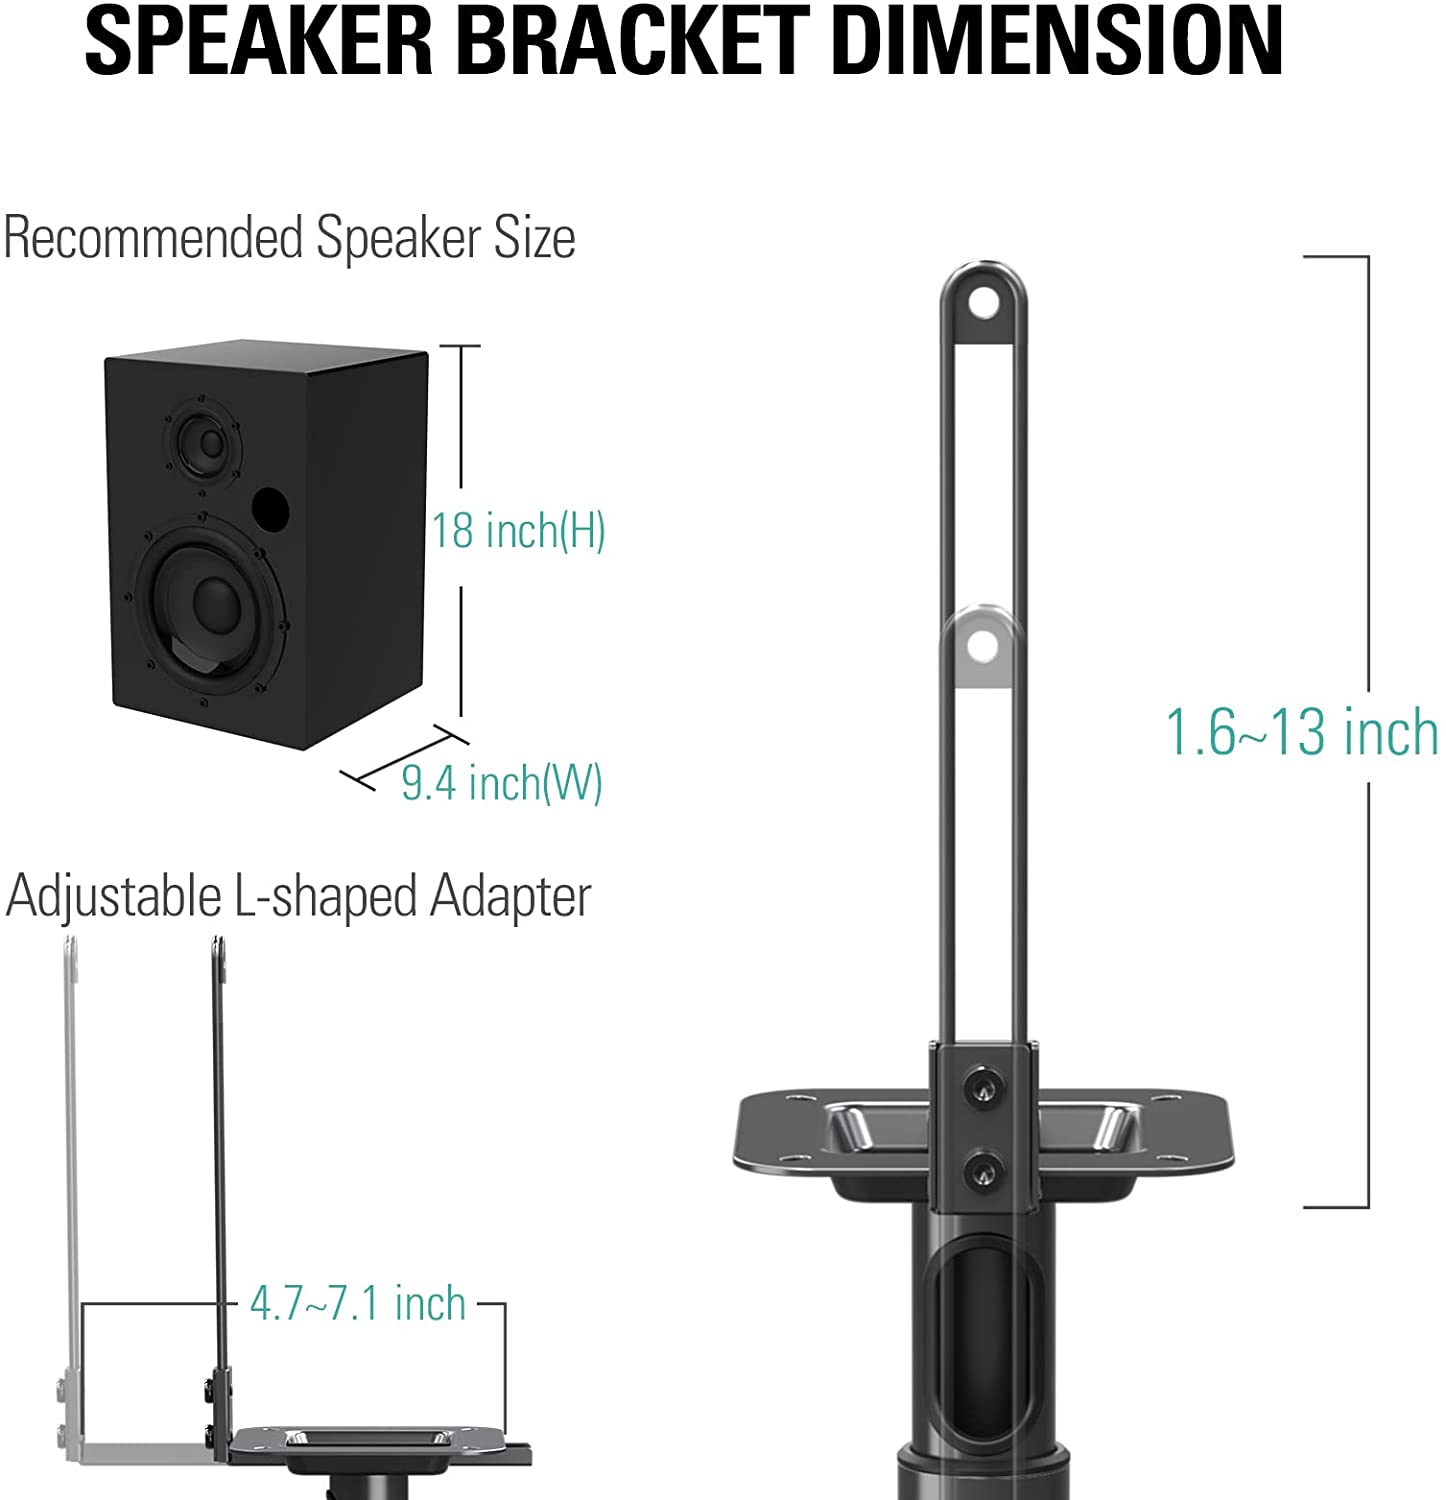 stand for speakers fits max 18''×9.4‘’ speakers